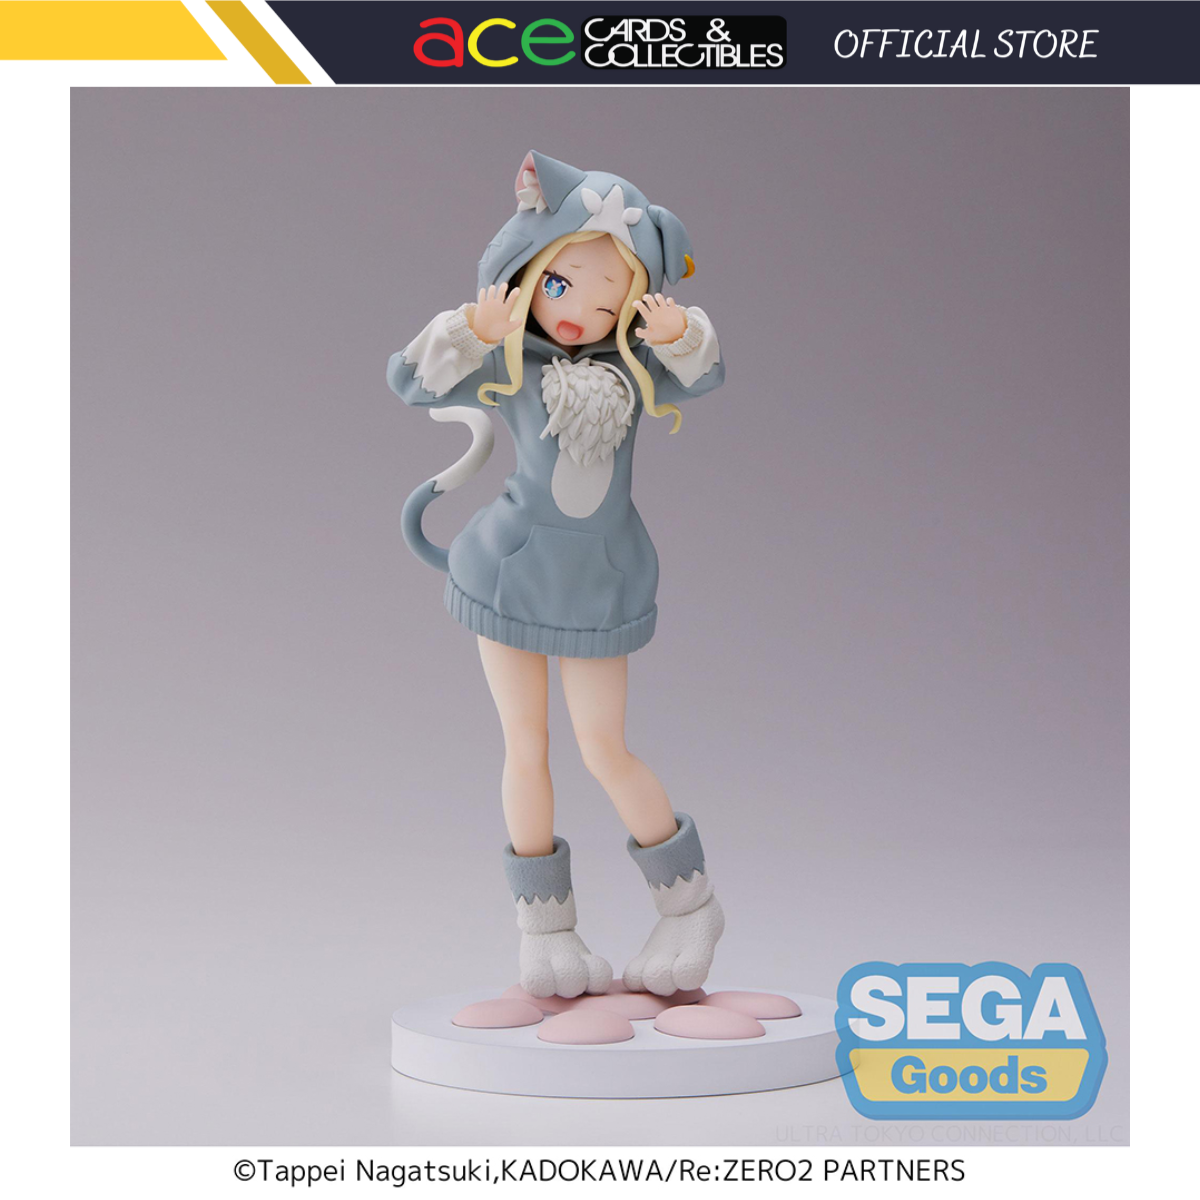 Re:Zero Starting Life In Another World Luminaata Figure "Beatrice" (The Great Spirit Pack)-Sega-Ace Cards & Collectibles